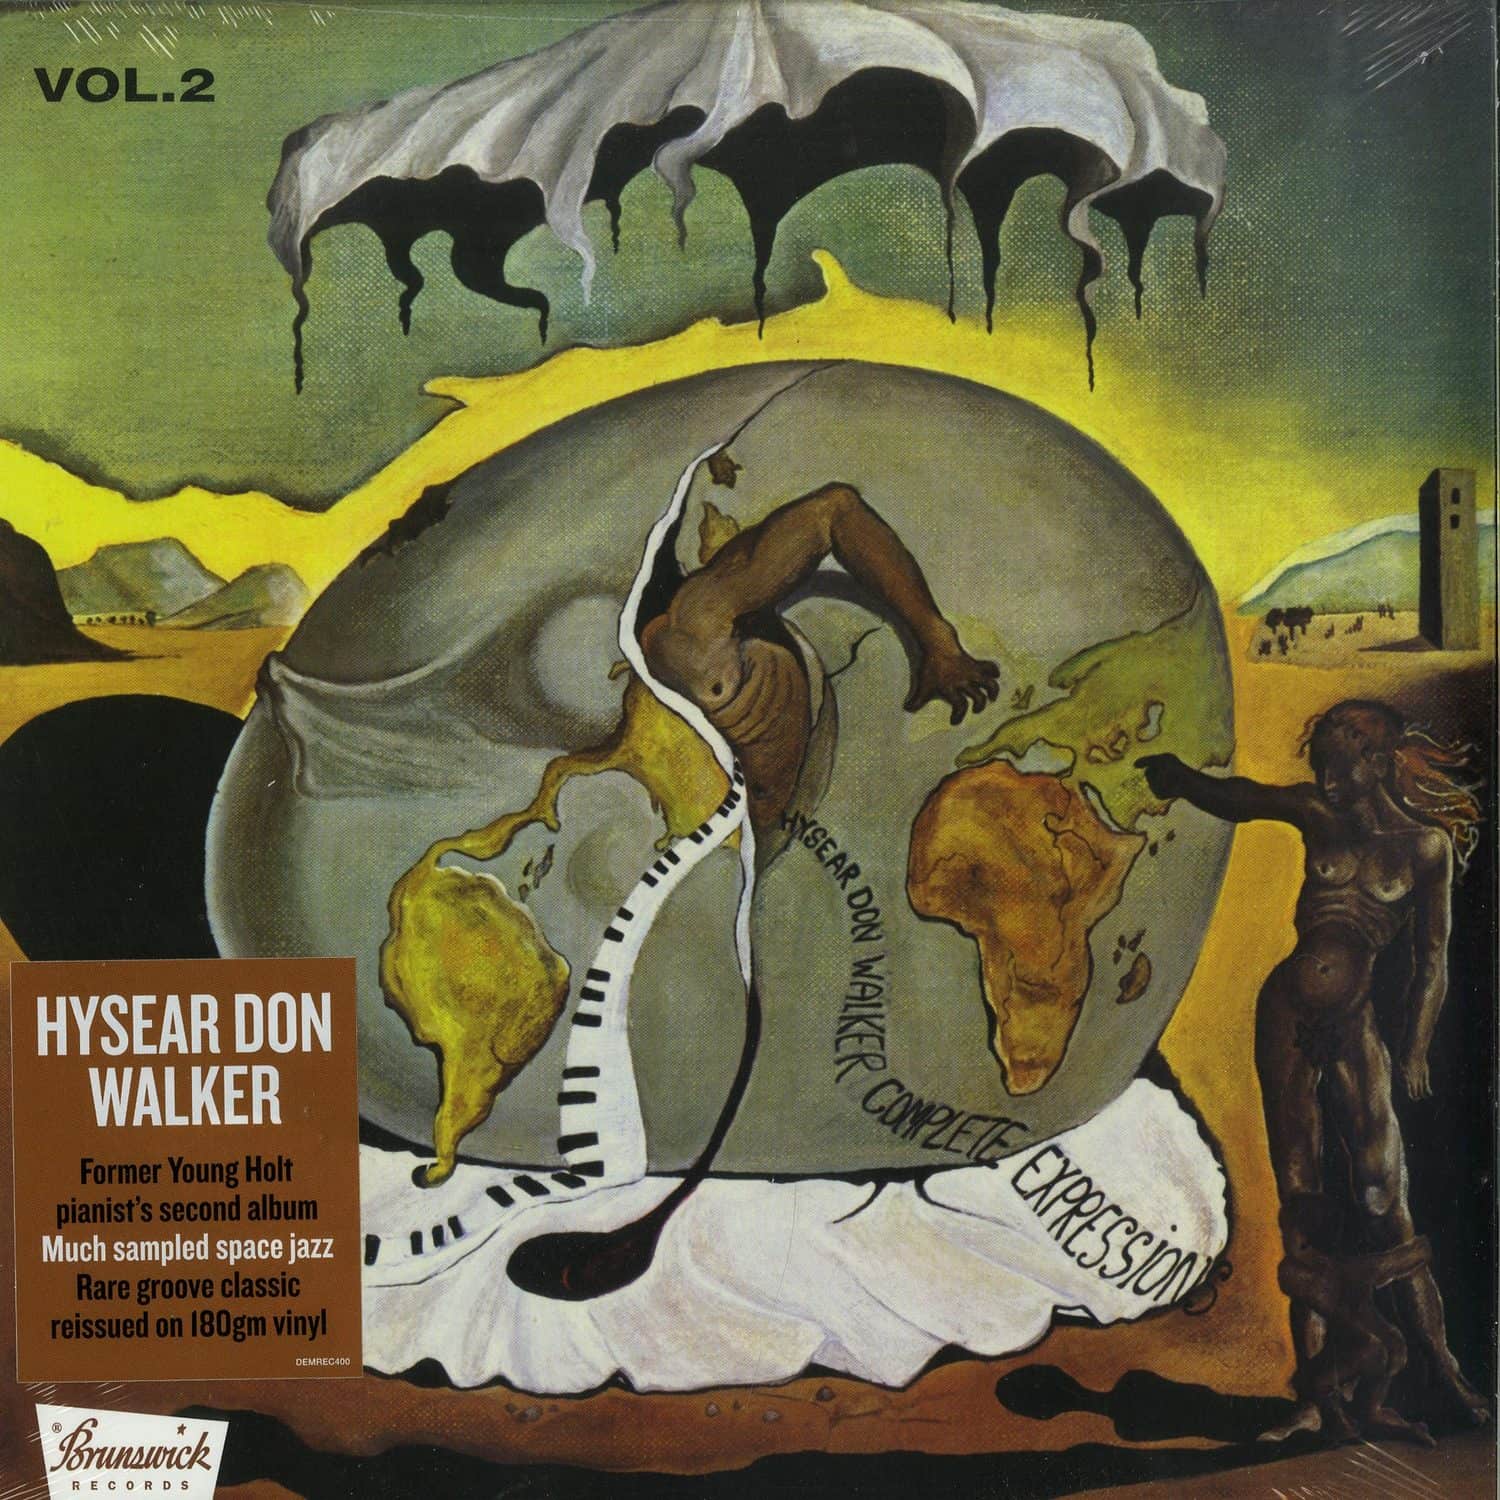 Hysear Don Walker - COMPLETE EXPRESSIONS VOL. 2 